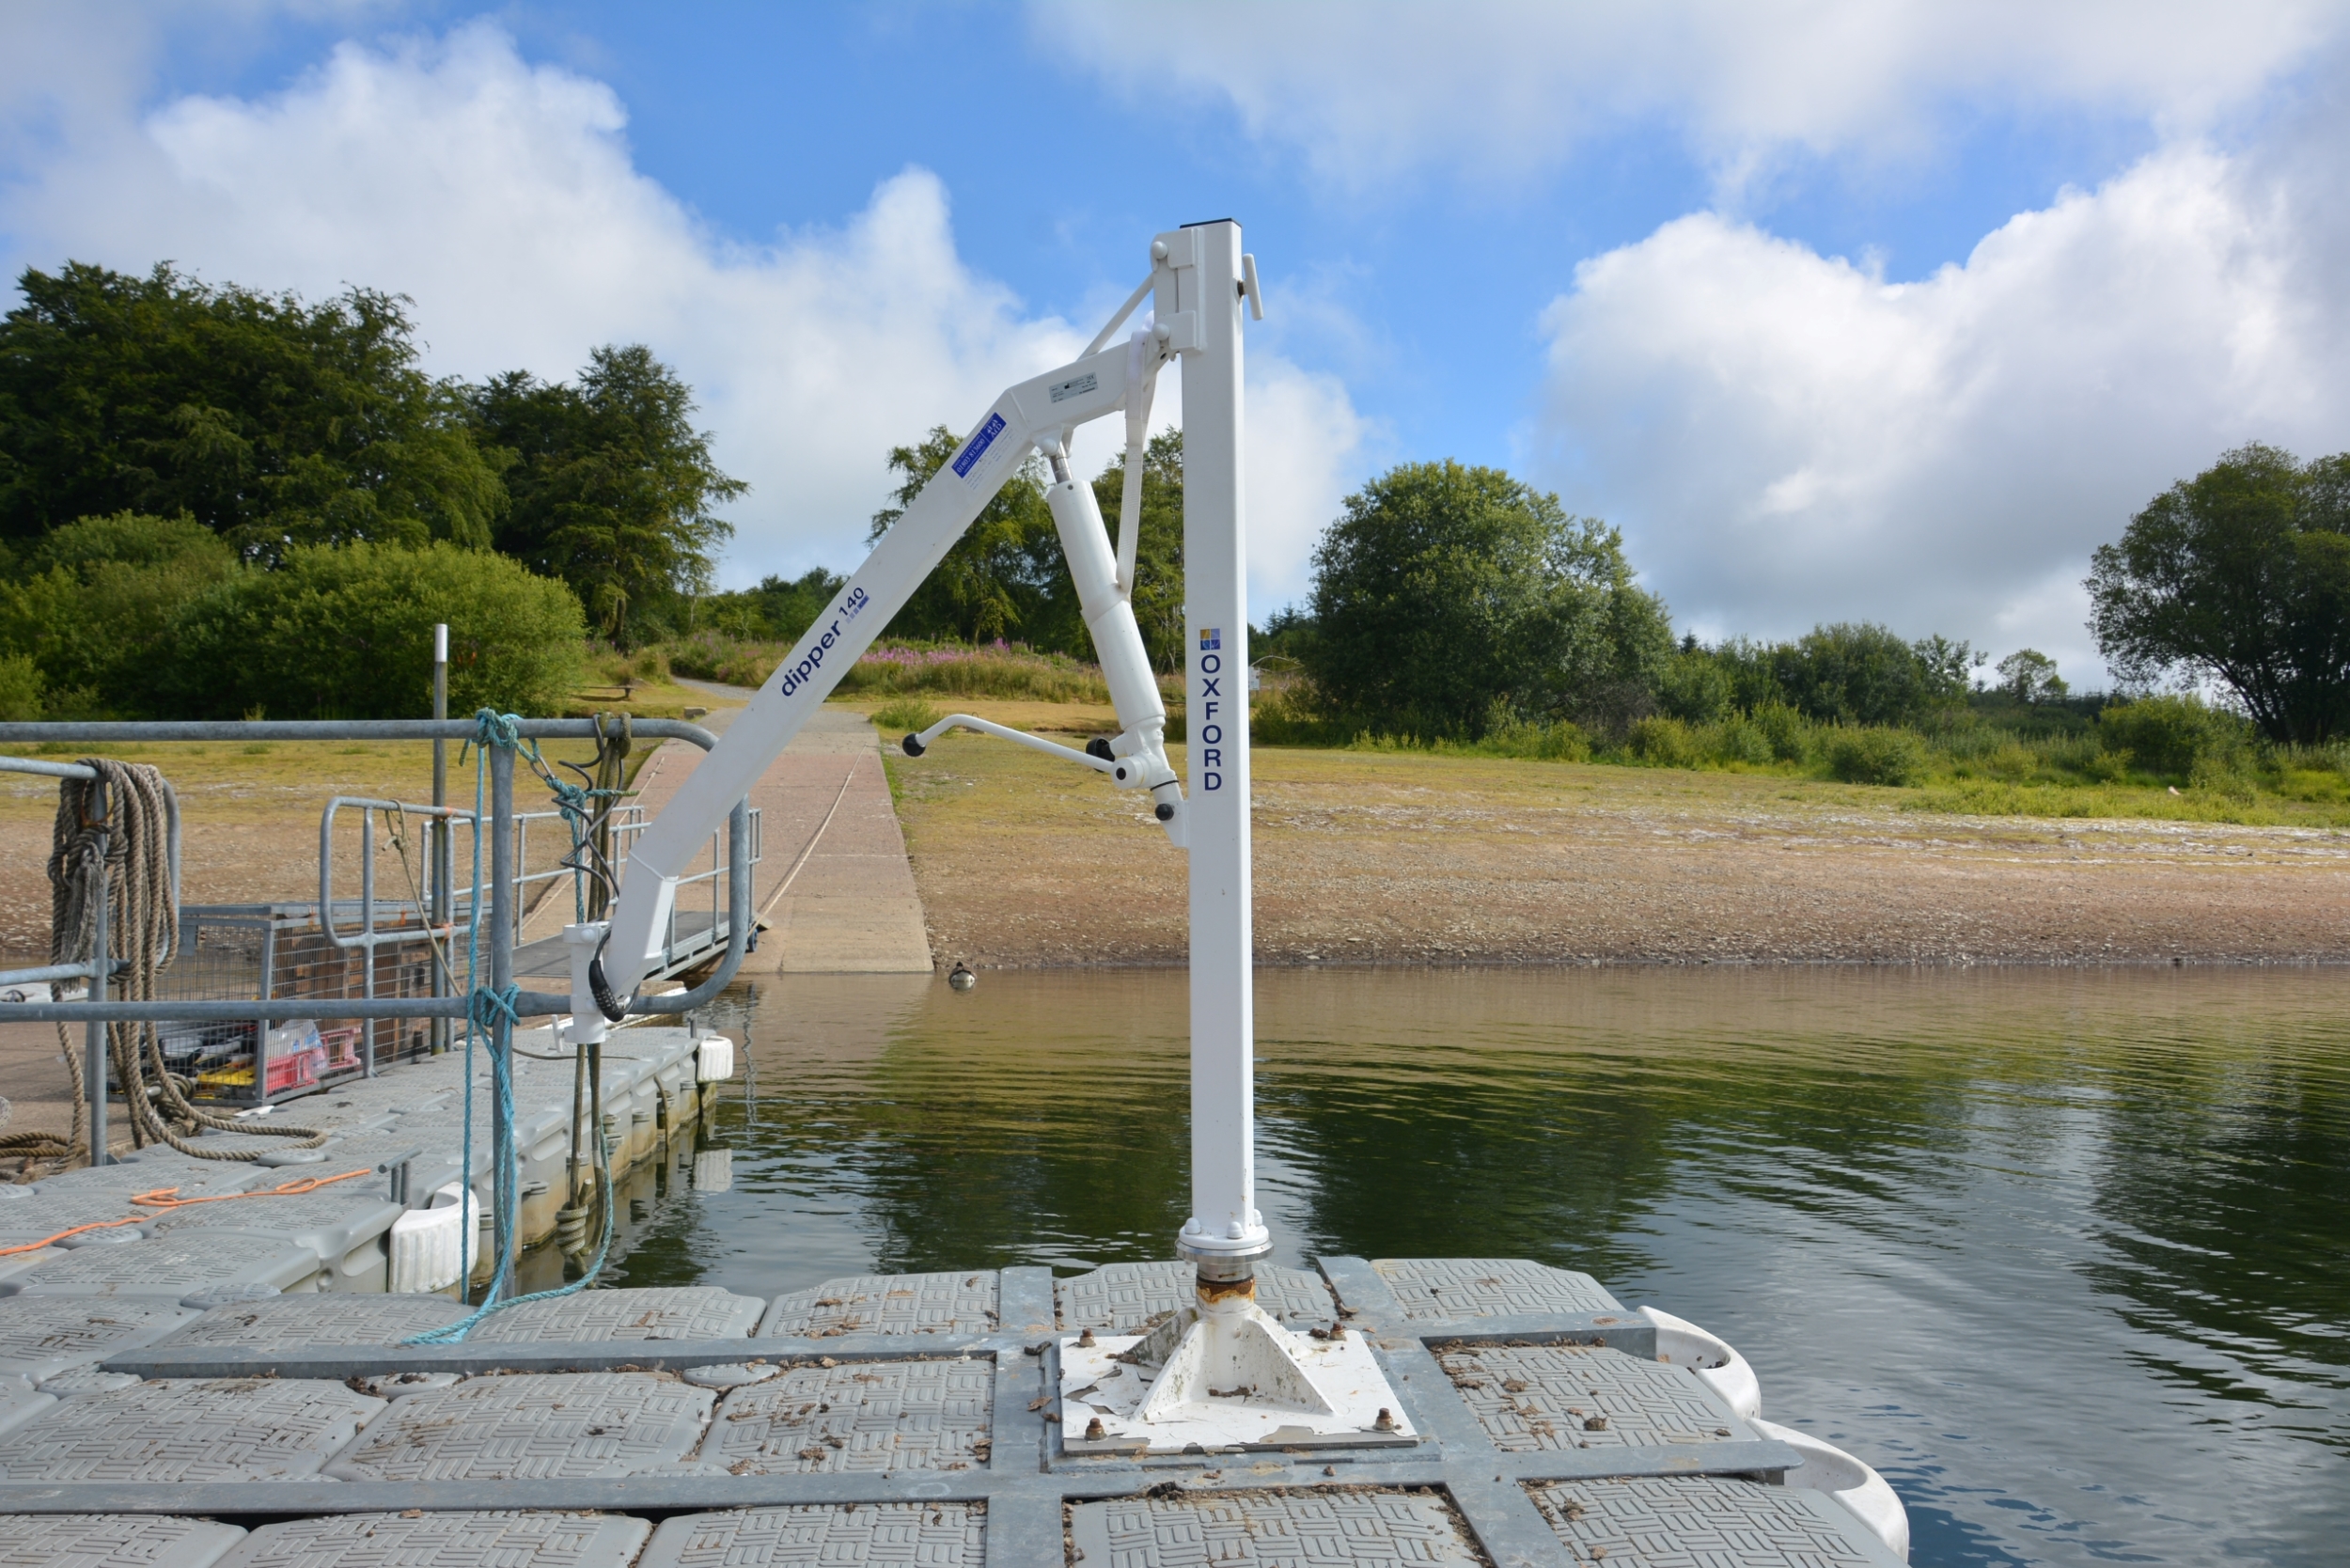 A white mechanic machine standing upright from a jetty surrounded by water.